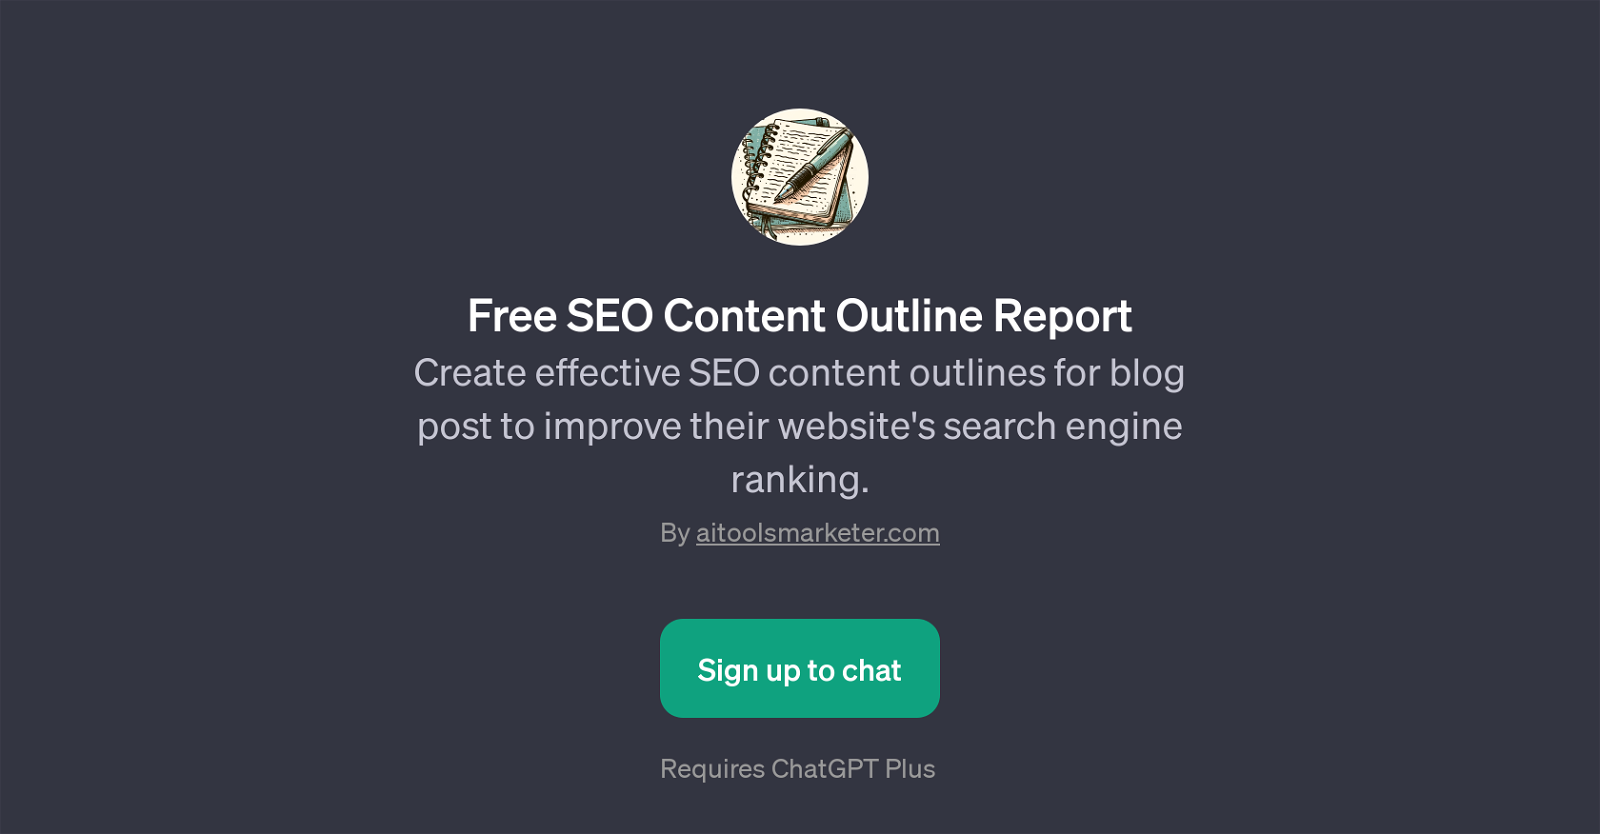 Free SEO Content Outline Report website